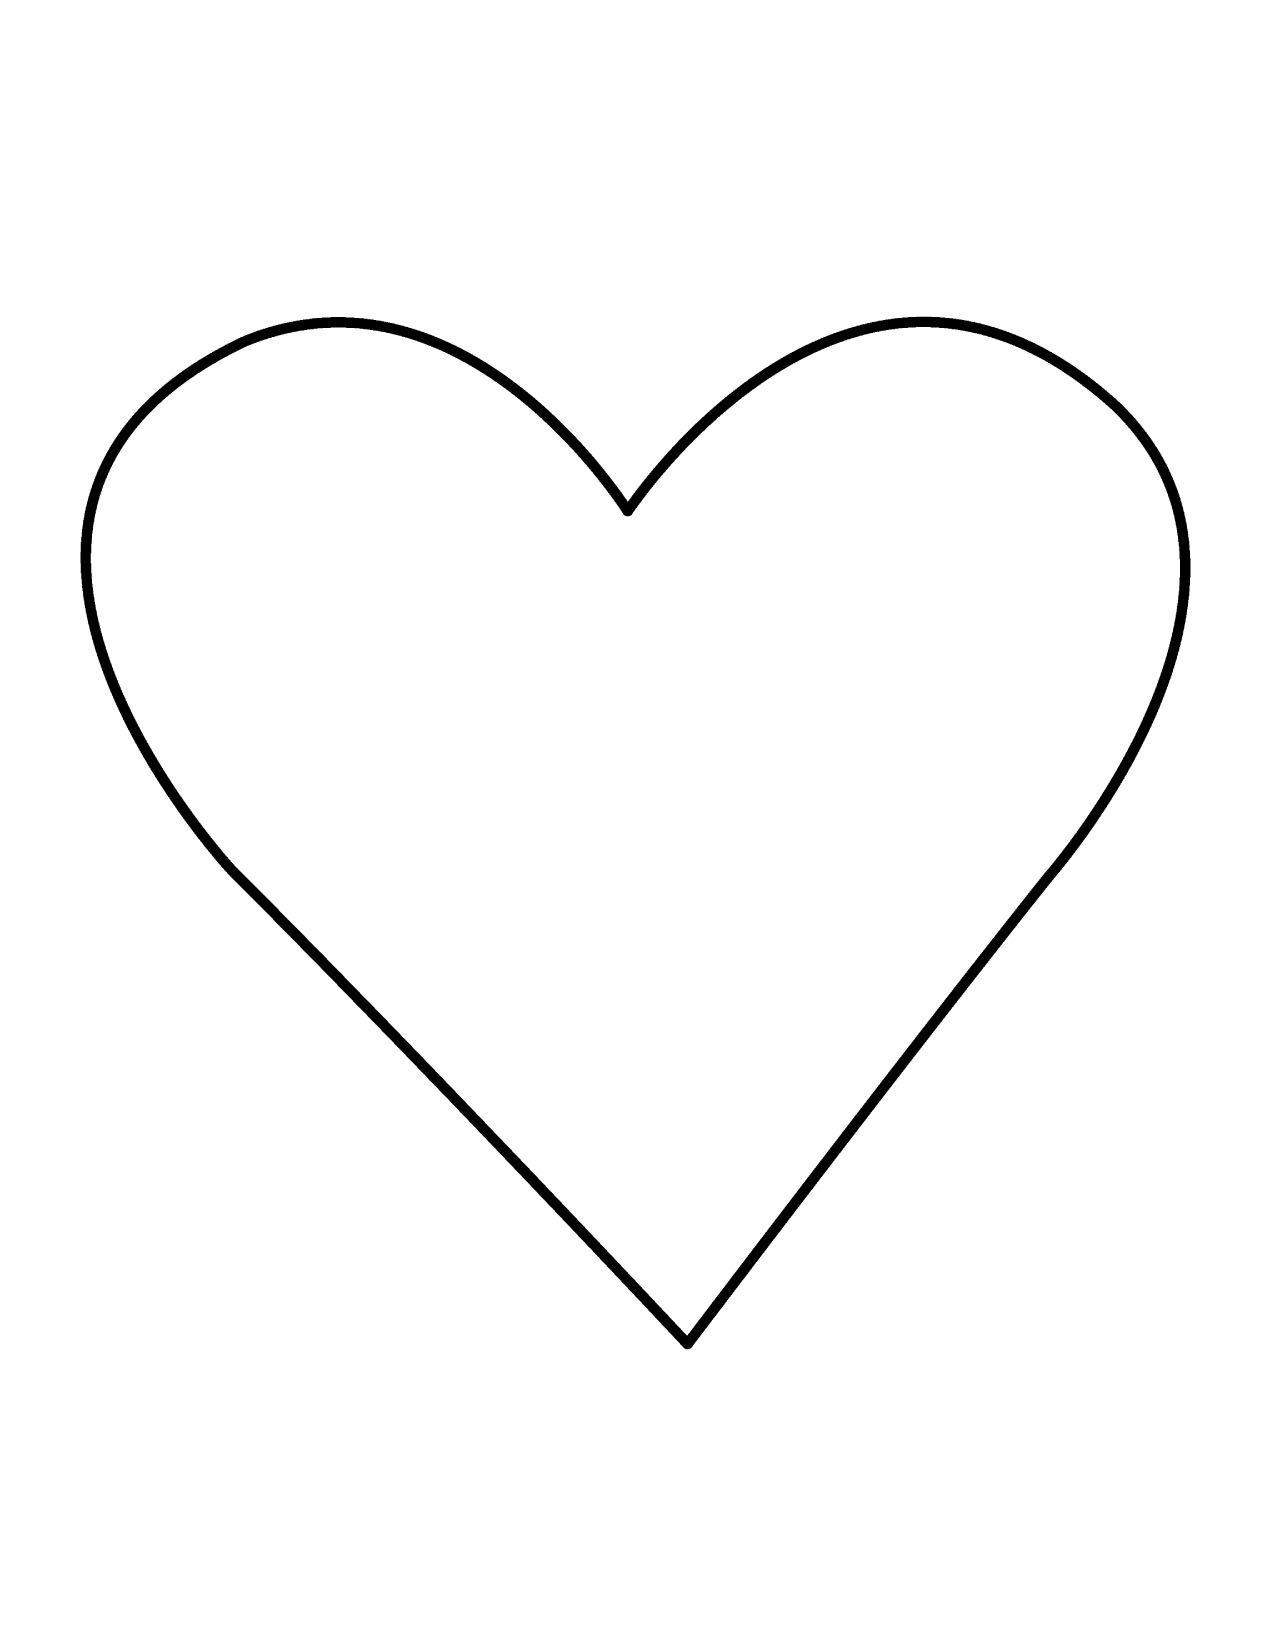 Heart Scroll Black and White Logo - Heart scroll clip art | Clipart Panda - Free Clipart Images